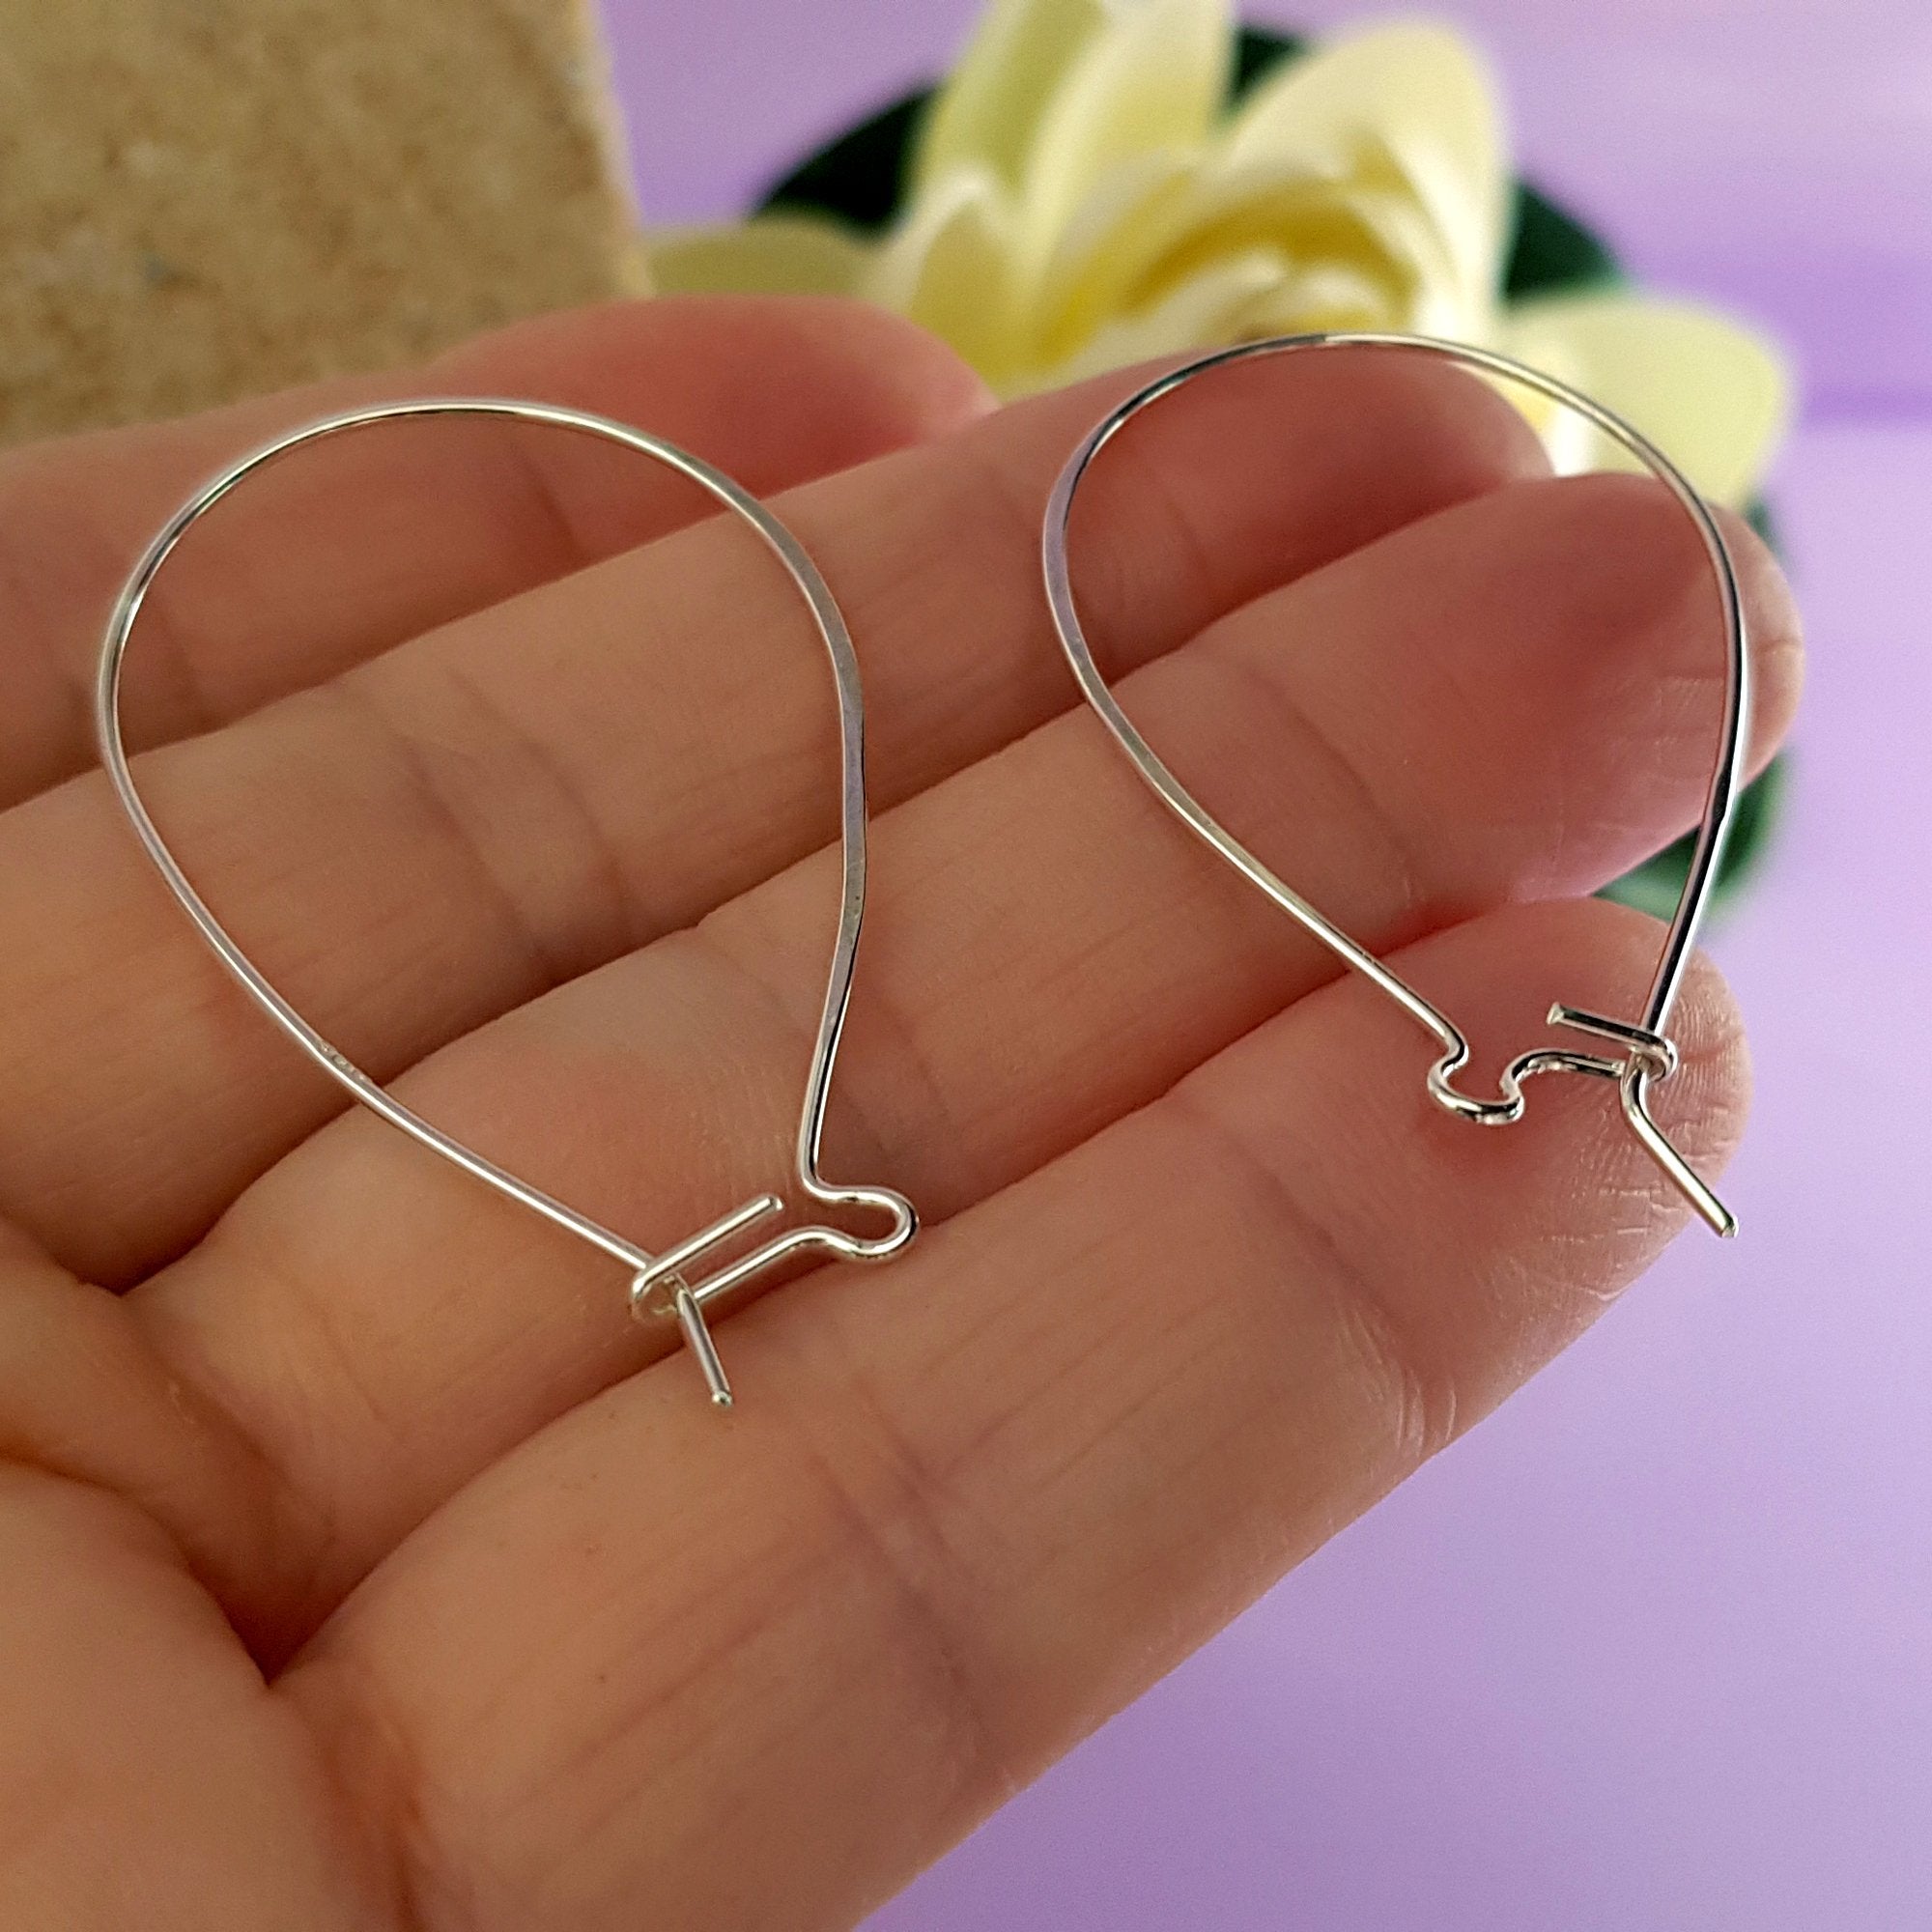 Buy 1 Pair Kidney Ear Wire Lightweight Thin Gauge Wire Earring Wires  Earring Hook Component in Sterling Silver or 14K Gold Filled Online in  India - Etsy